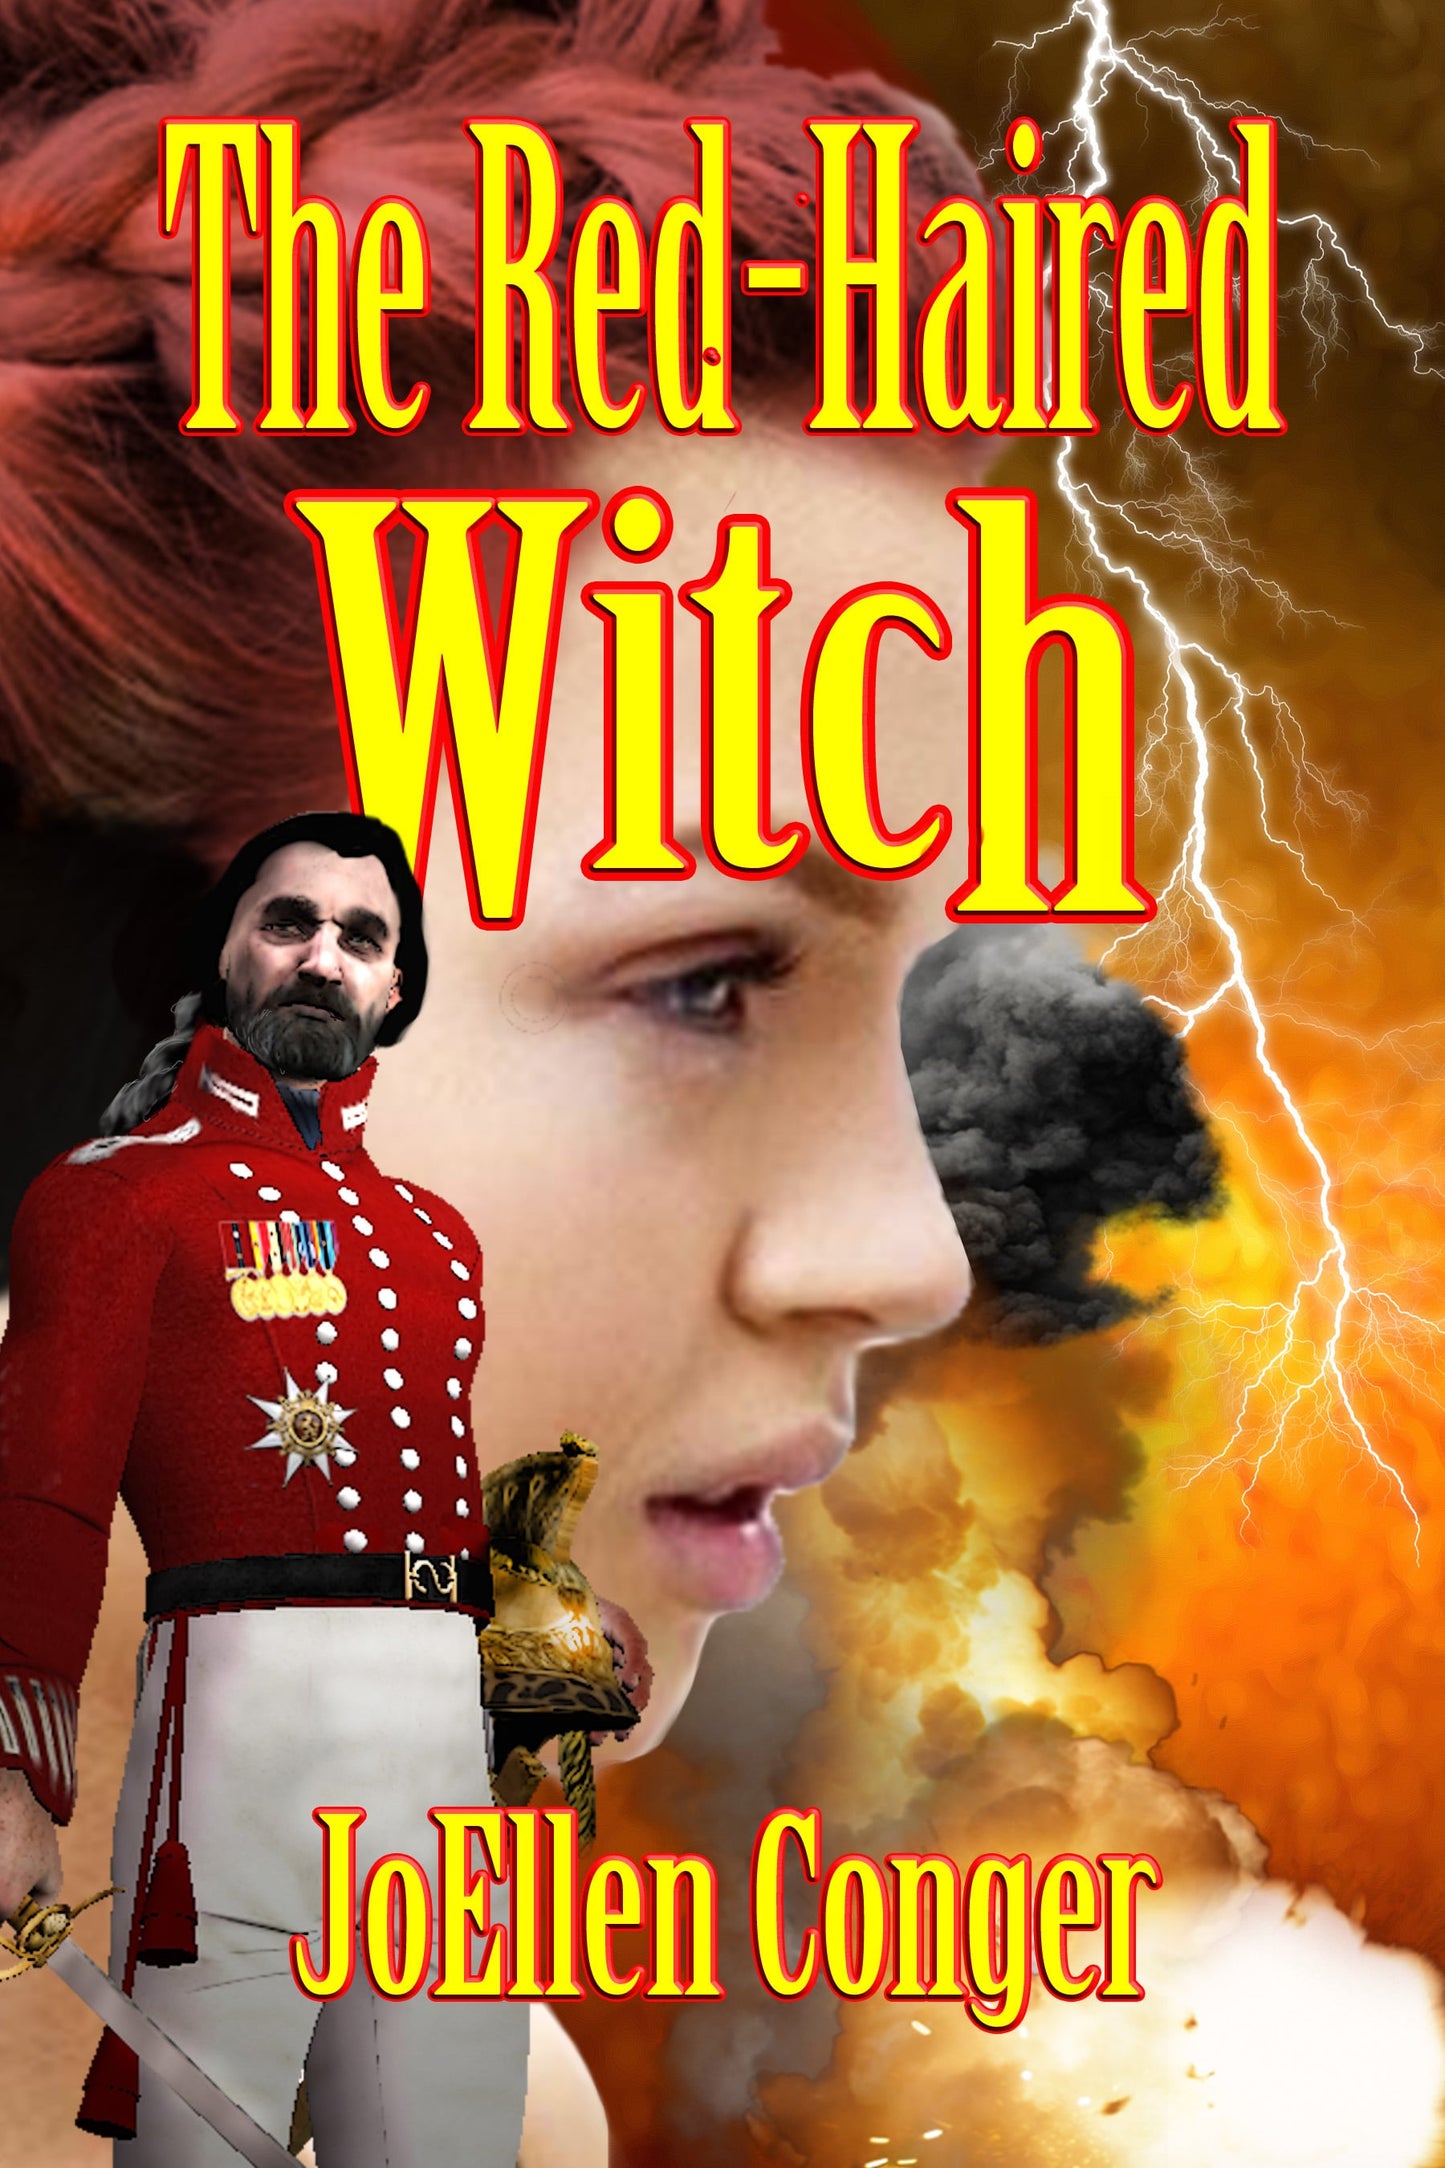 The Red-Haired Witch (Queen of Candelore Series Book 4)